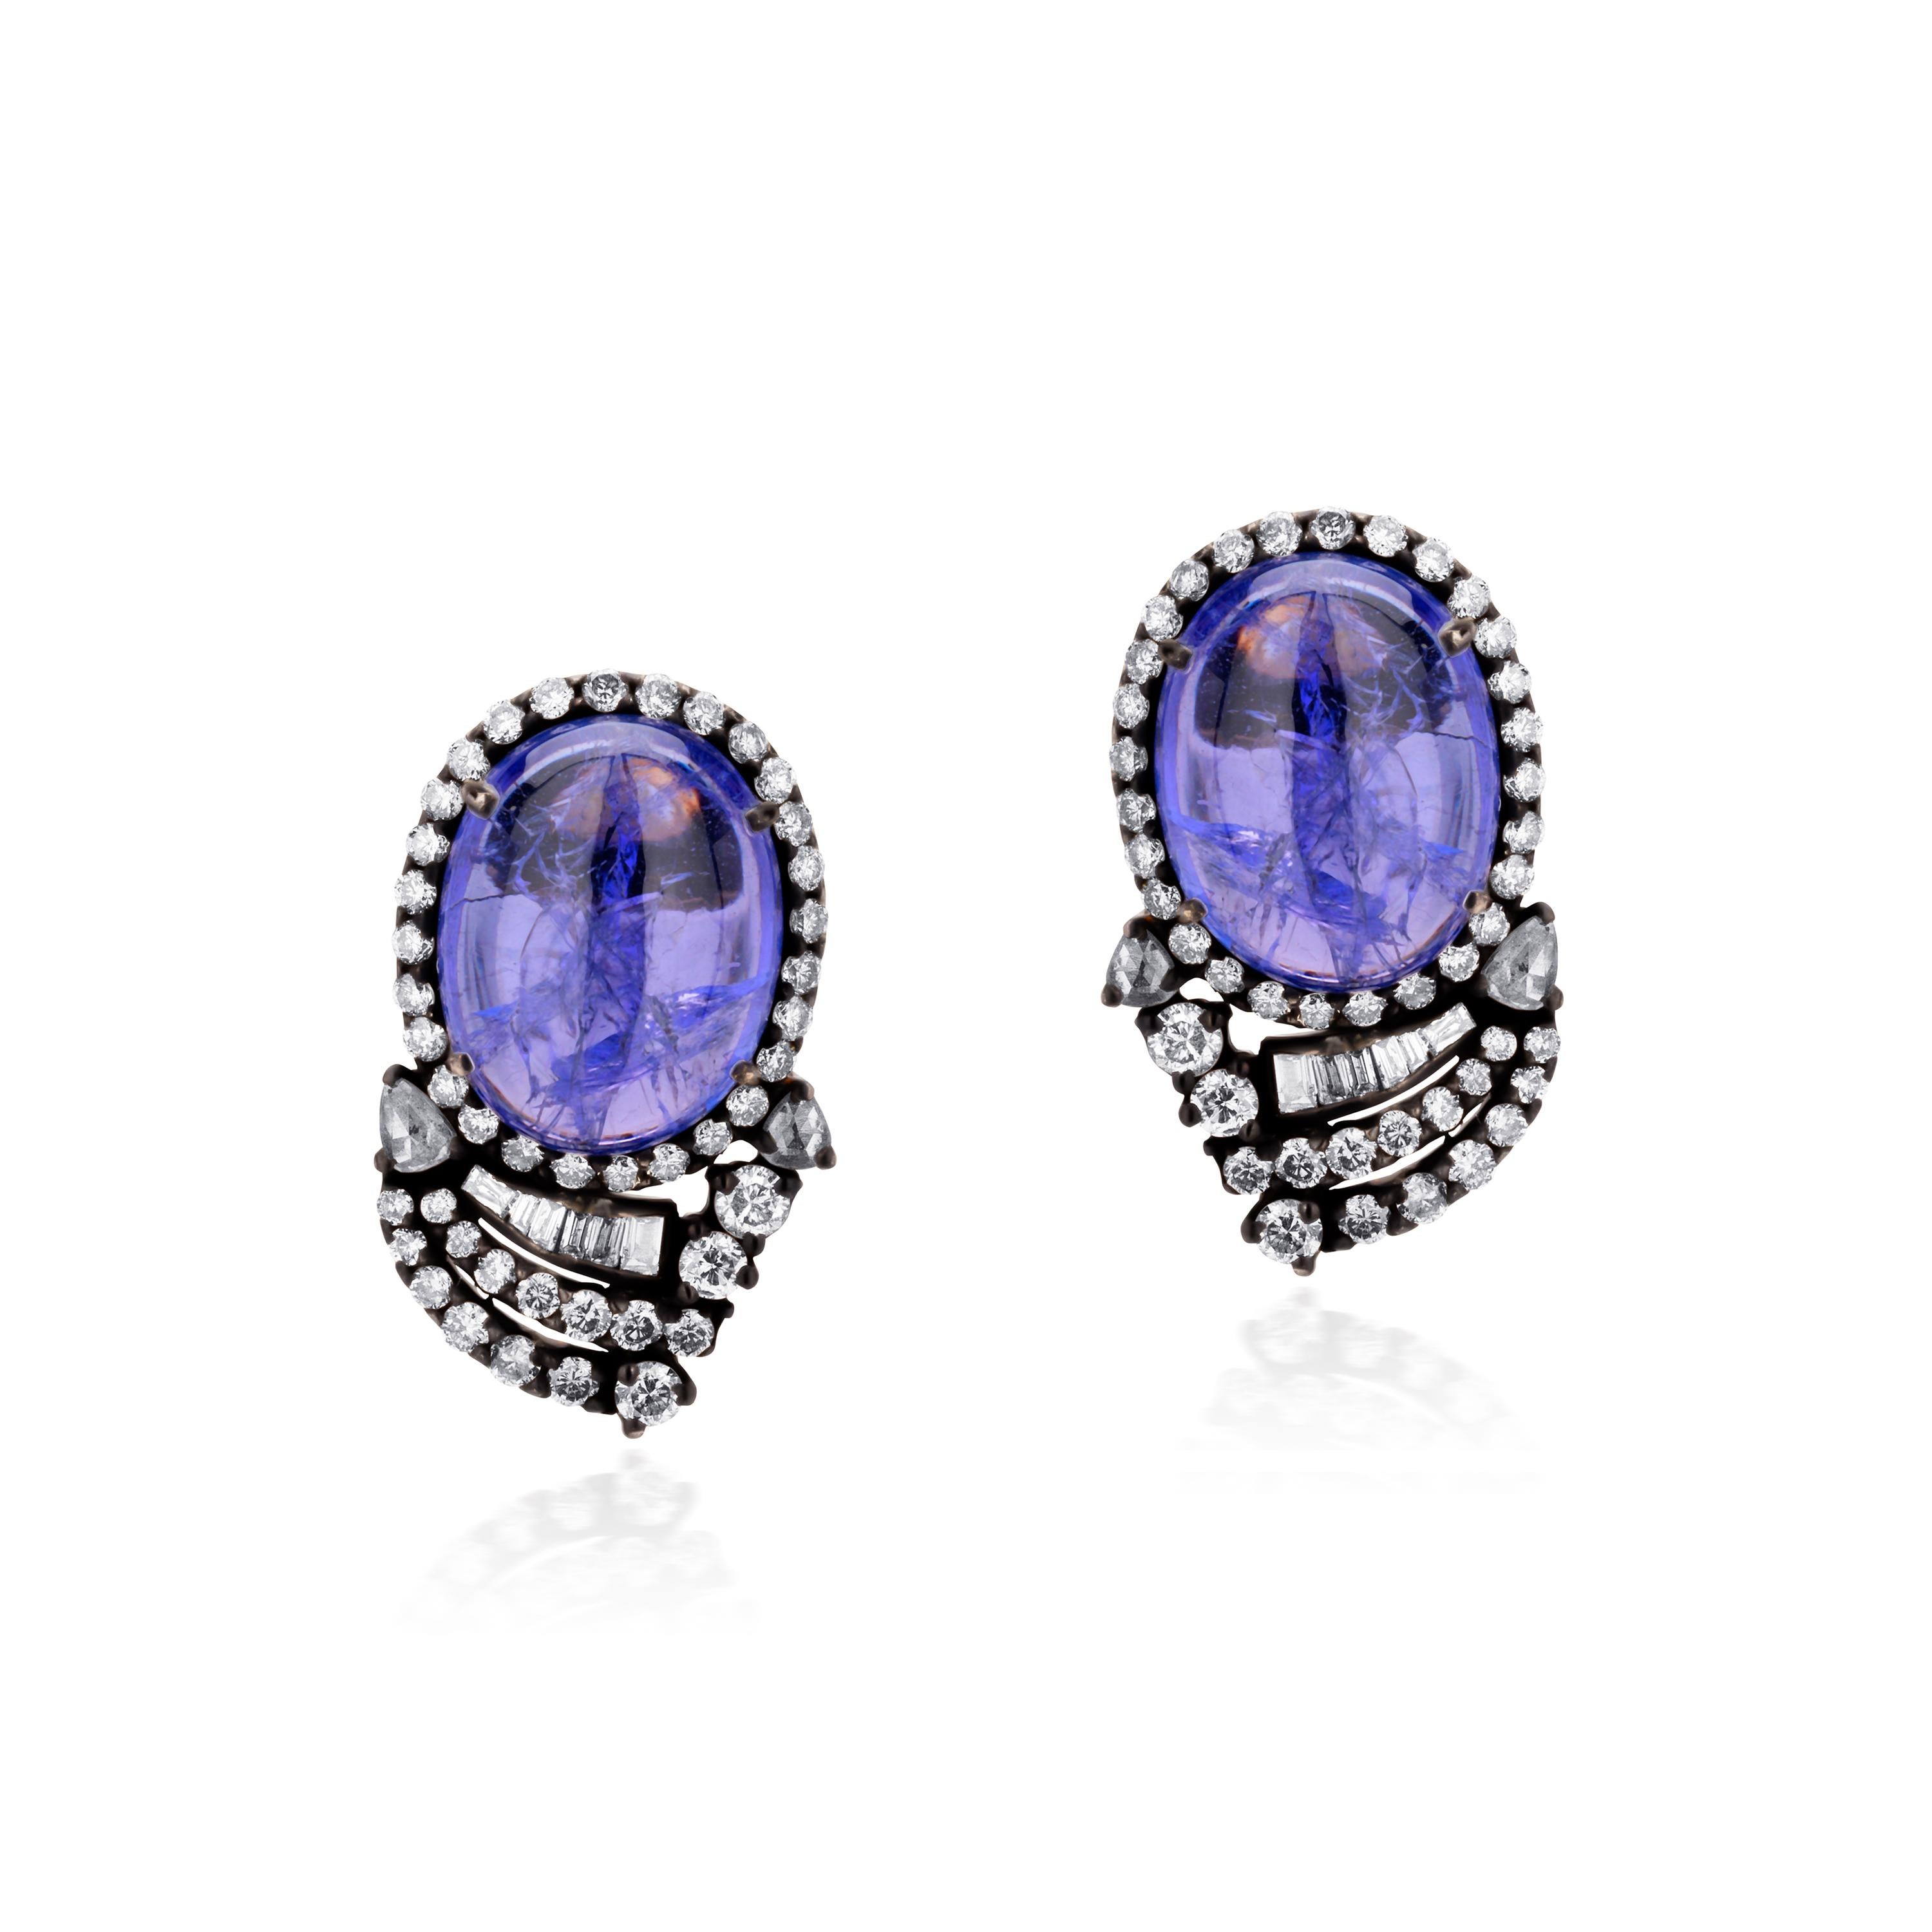 These Victorian studs are resplendent with two oval shaped tanzanite cabochons together weighing 22.5Cts. Each tanzanite is surrounded by sparkling round prong set diamonds mounted of black metal. The bottom of the stone has rows of diamonds in